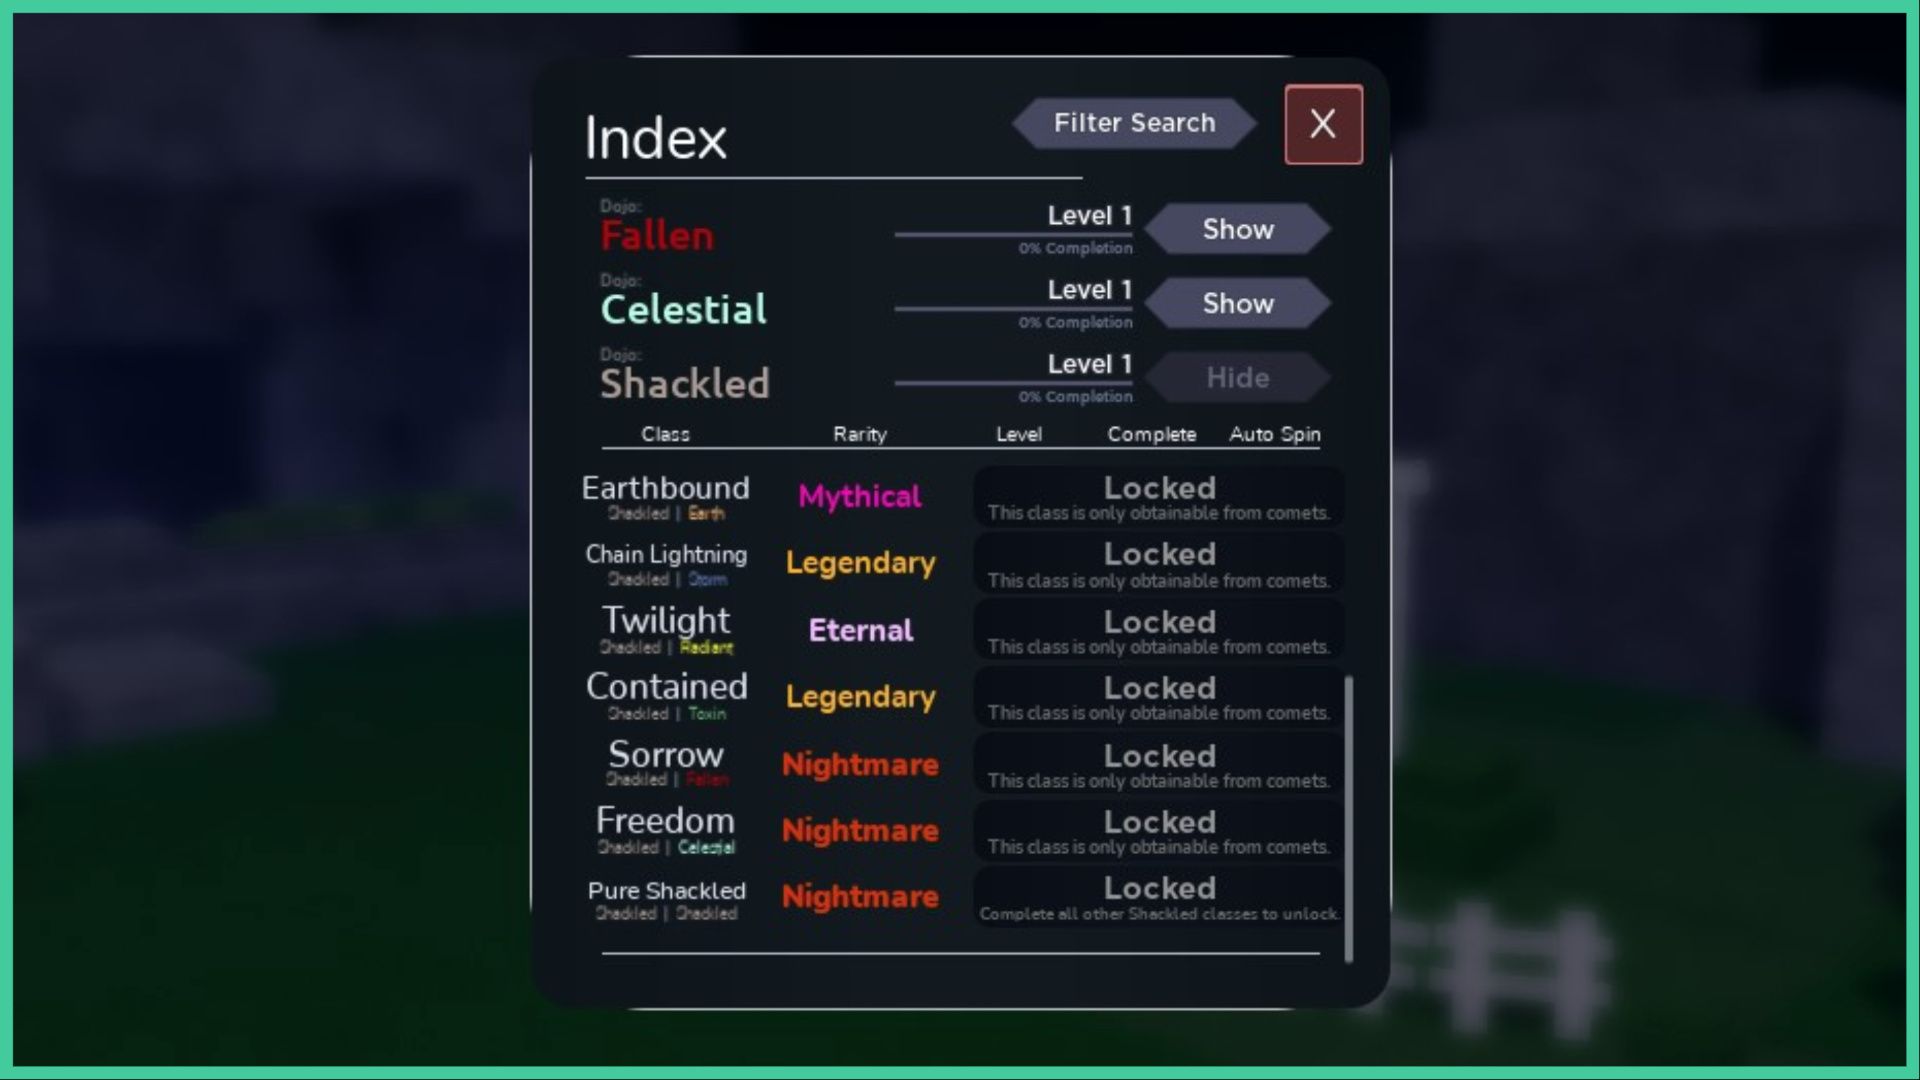 feature image for our nightmare elemental shackled guide, the image features a screenshot from the element index in the game that displays the rarities, classes, and more in regards to the shackled element and dojo